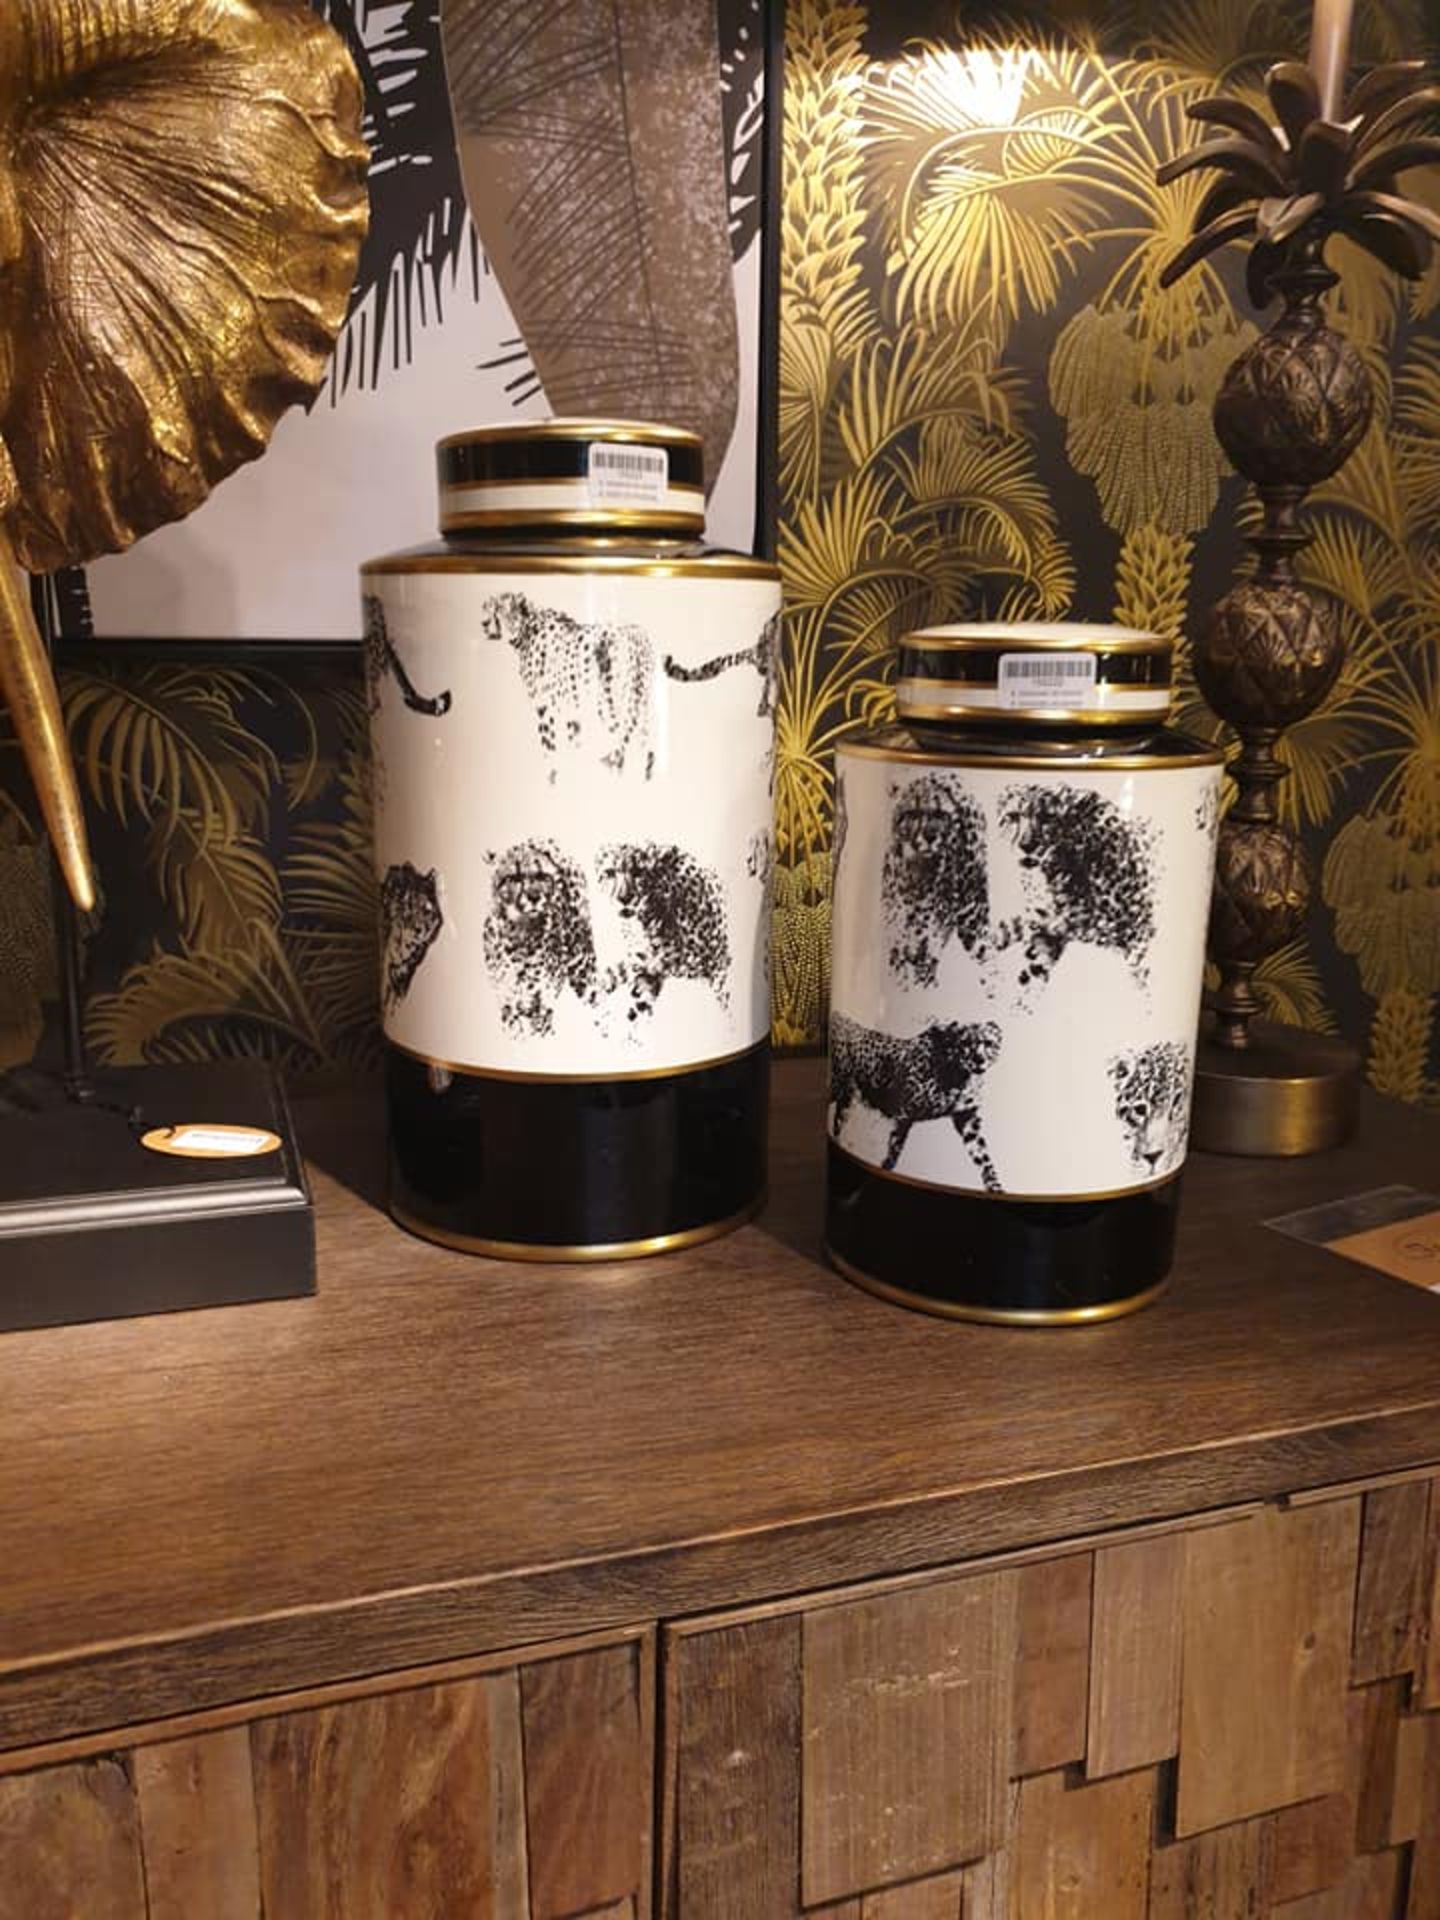 Safari - A Set Of 2 Stunning Porcelain Canisters In Black, White And Gold Rims Handmade Porcelain